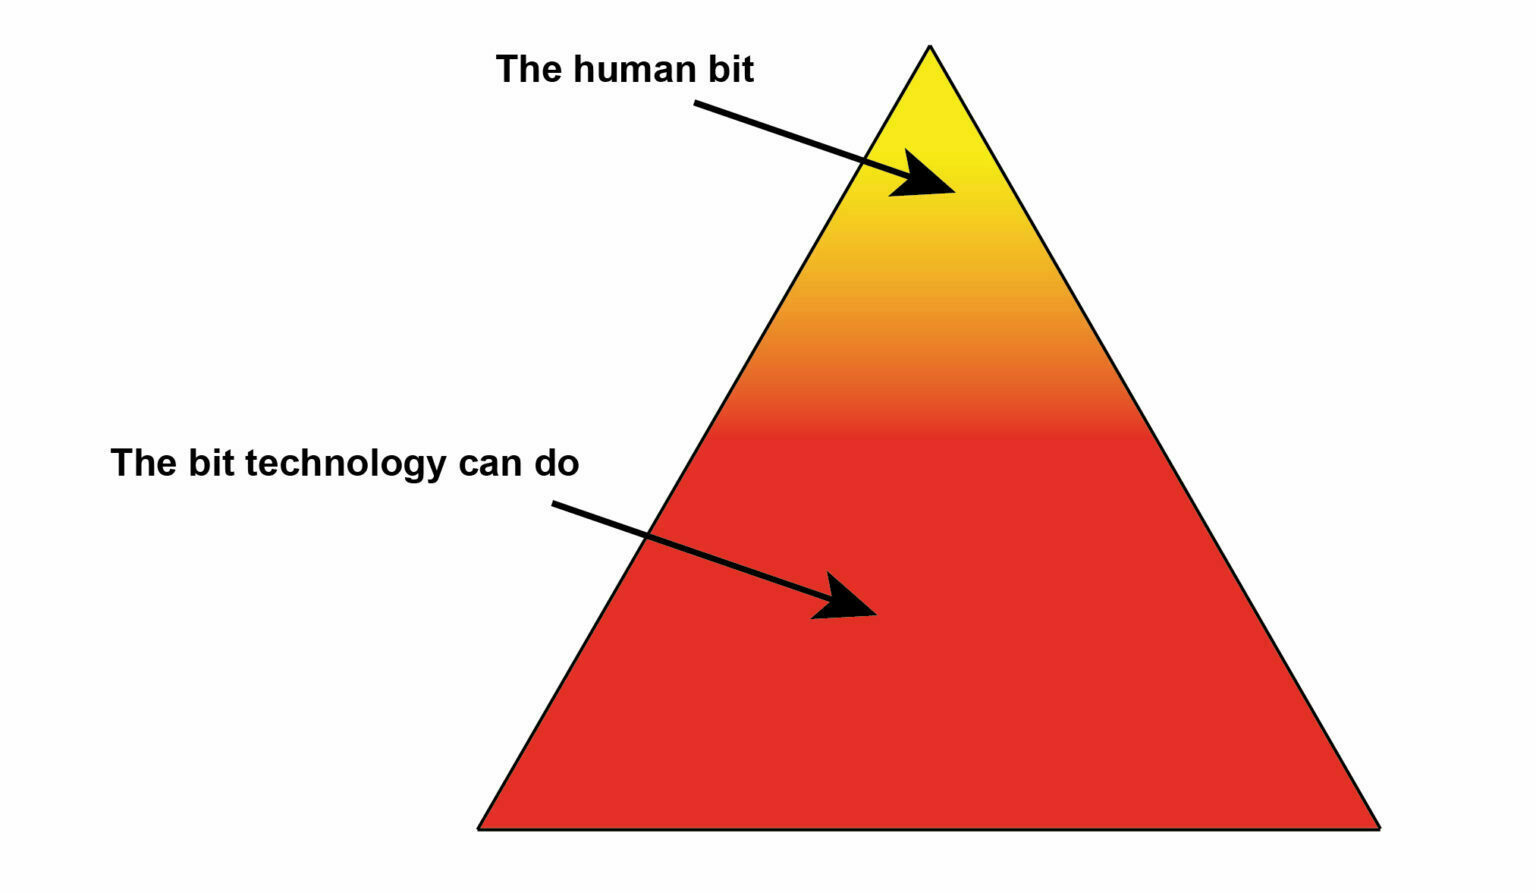 An equilateral triangle with most of it shaded red except the top (pointy) bit which is shaded yellow. The red part is labelled 'The bit technology can do' and the yellow part is labelled 'The human bit'